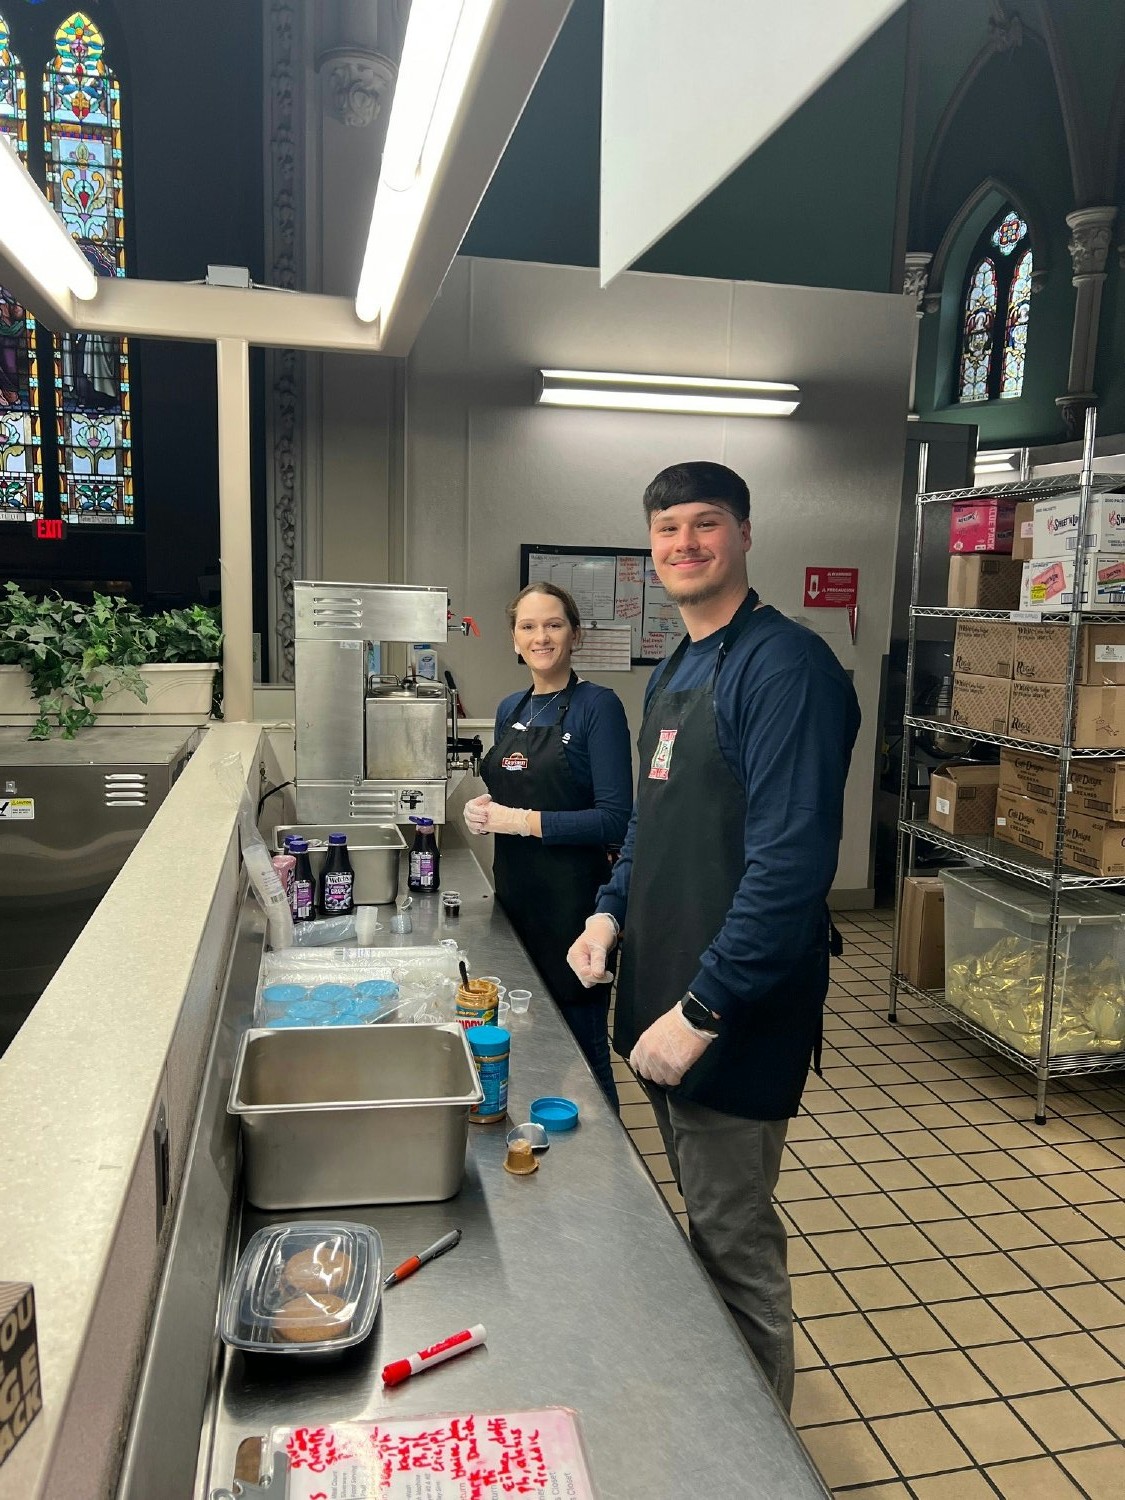 Employees lending there services to help serve a meal at a local soup kitchen